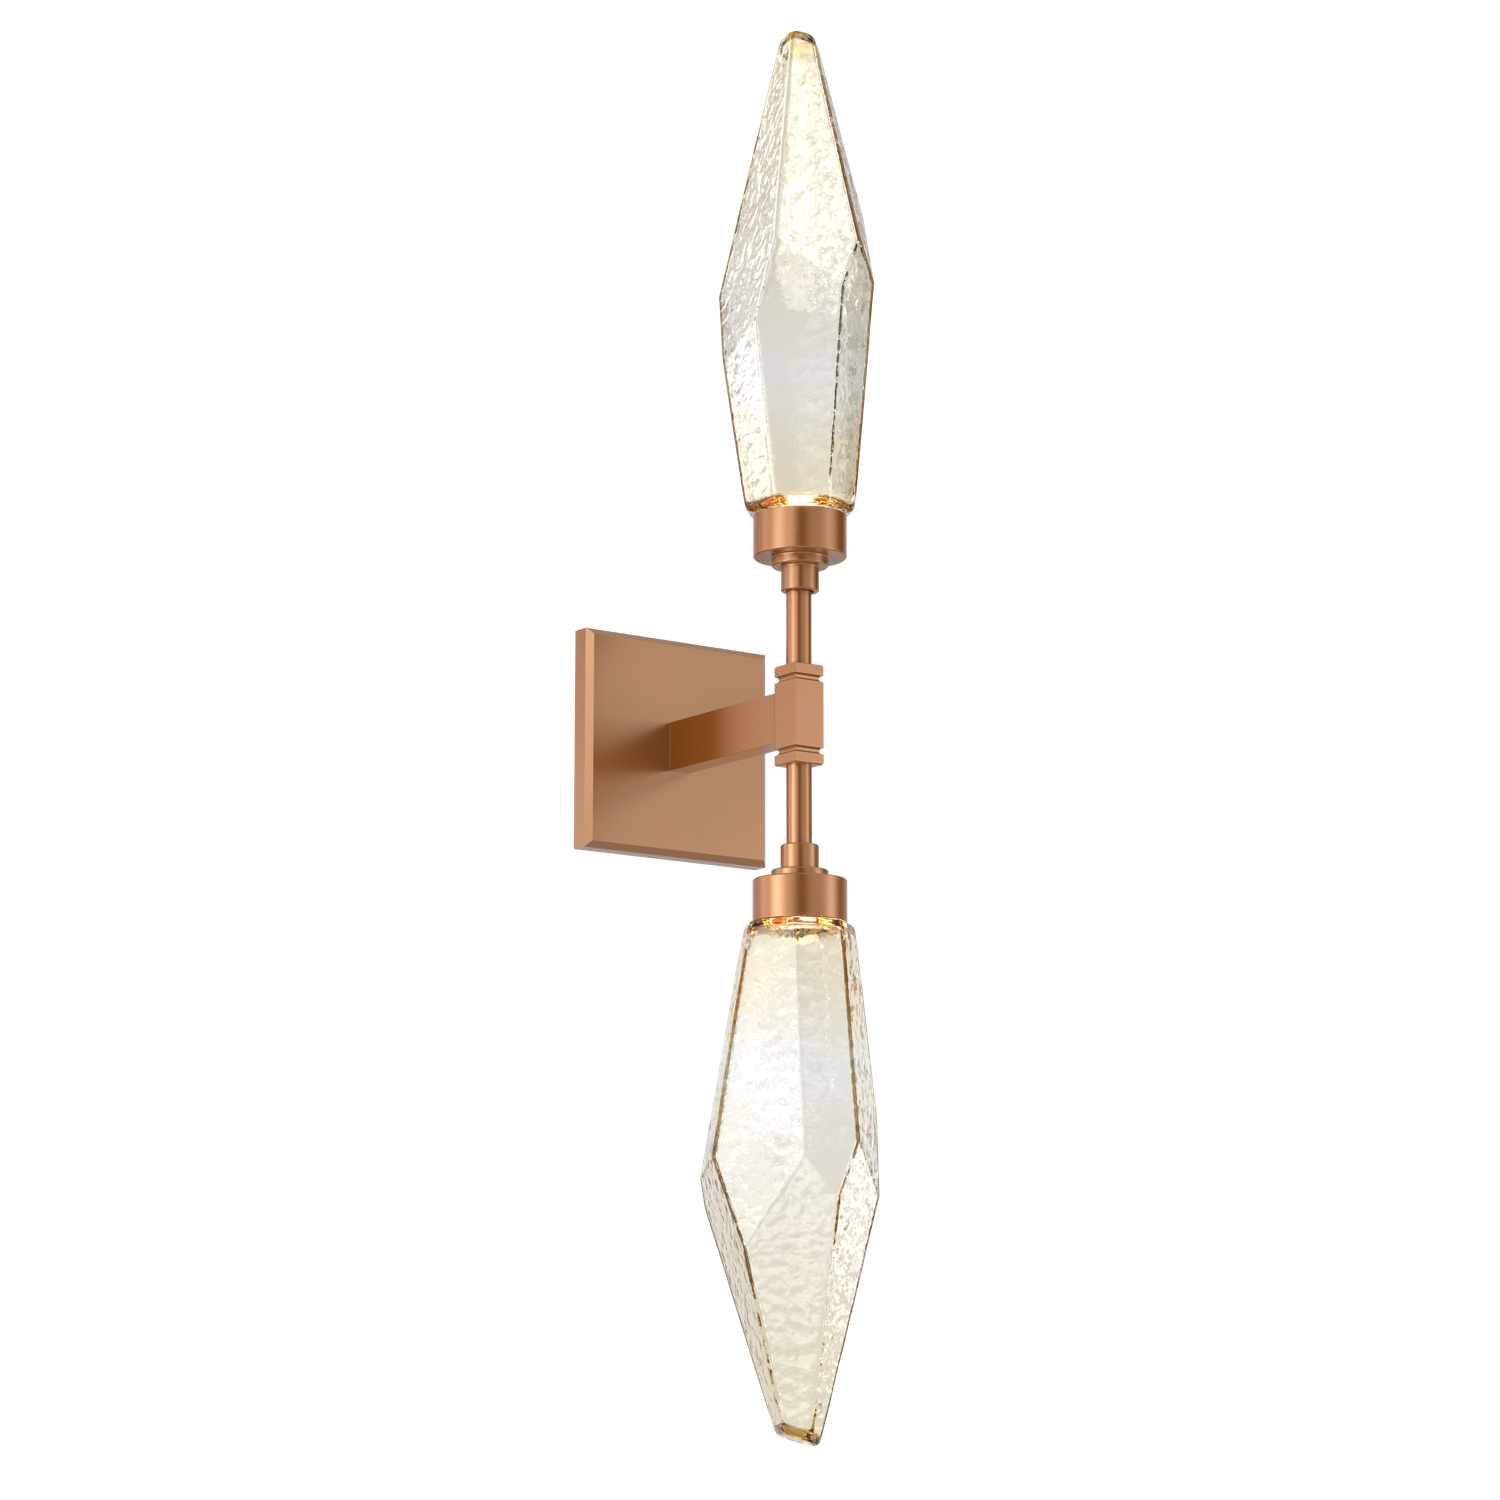 IDB0050-02-NB-CA-Hammerton-Studio-Rock-Crystal-wall-sconce-with-novel-brass-finish-and-chilled-amber-blown-glass-shades-and-LED-lamping